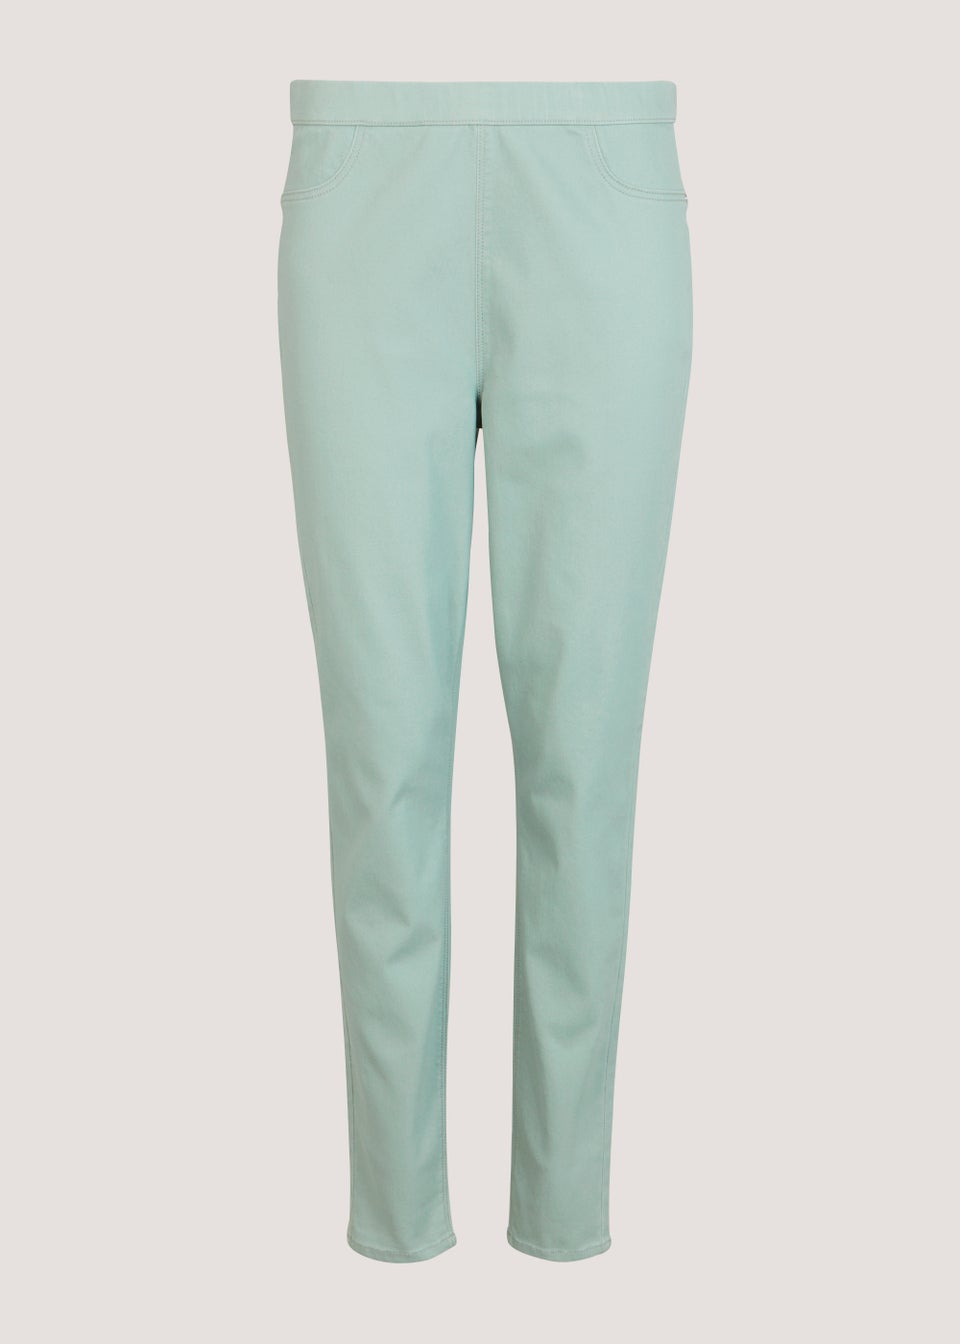 Rosie Mint Green Pull On Jeggings